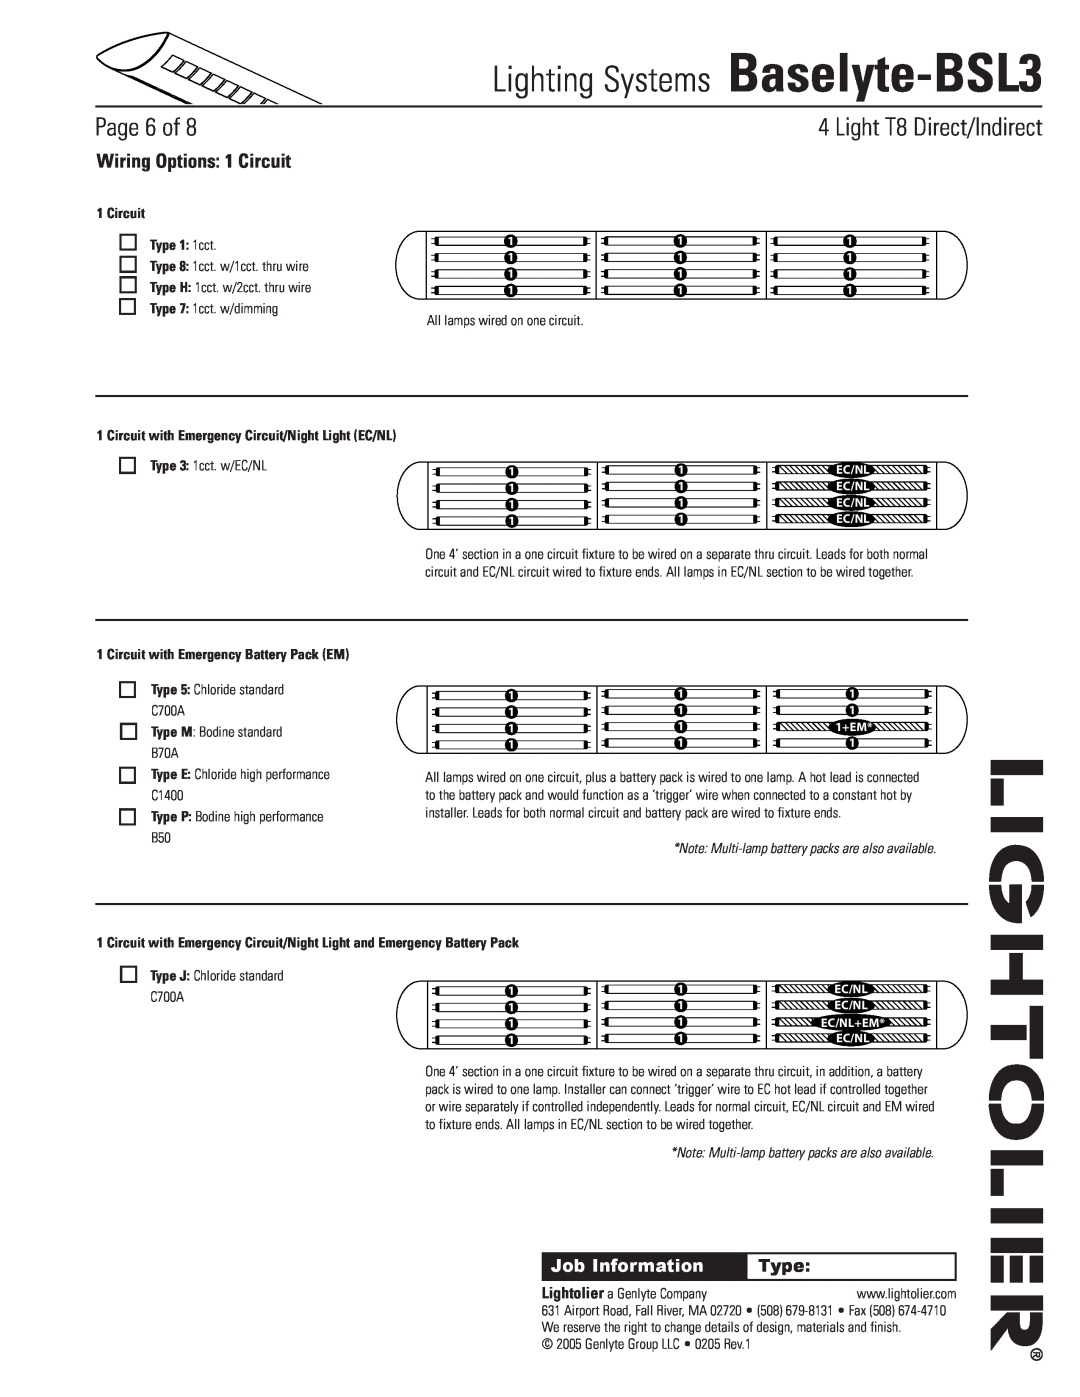 Lightolier Baselyte-BSL3 Wiring Options 1 Circuit, Circuit Type 1 1cct, Circuit with Emergency Battery Pack EM, Page of 